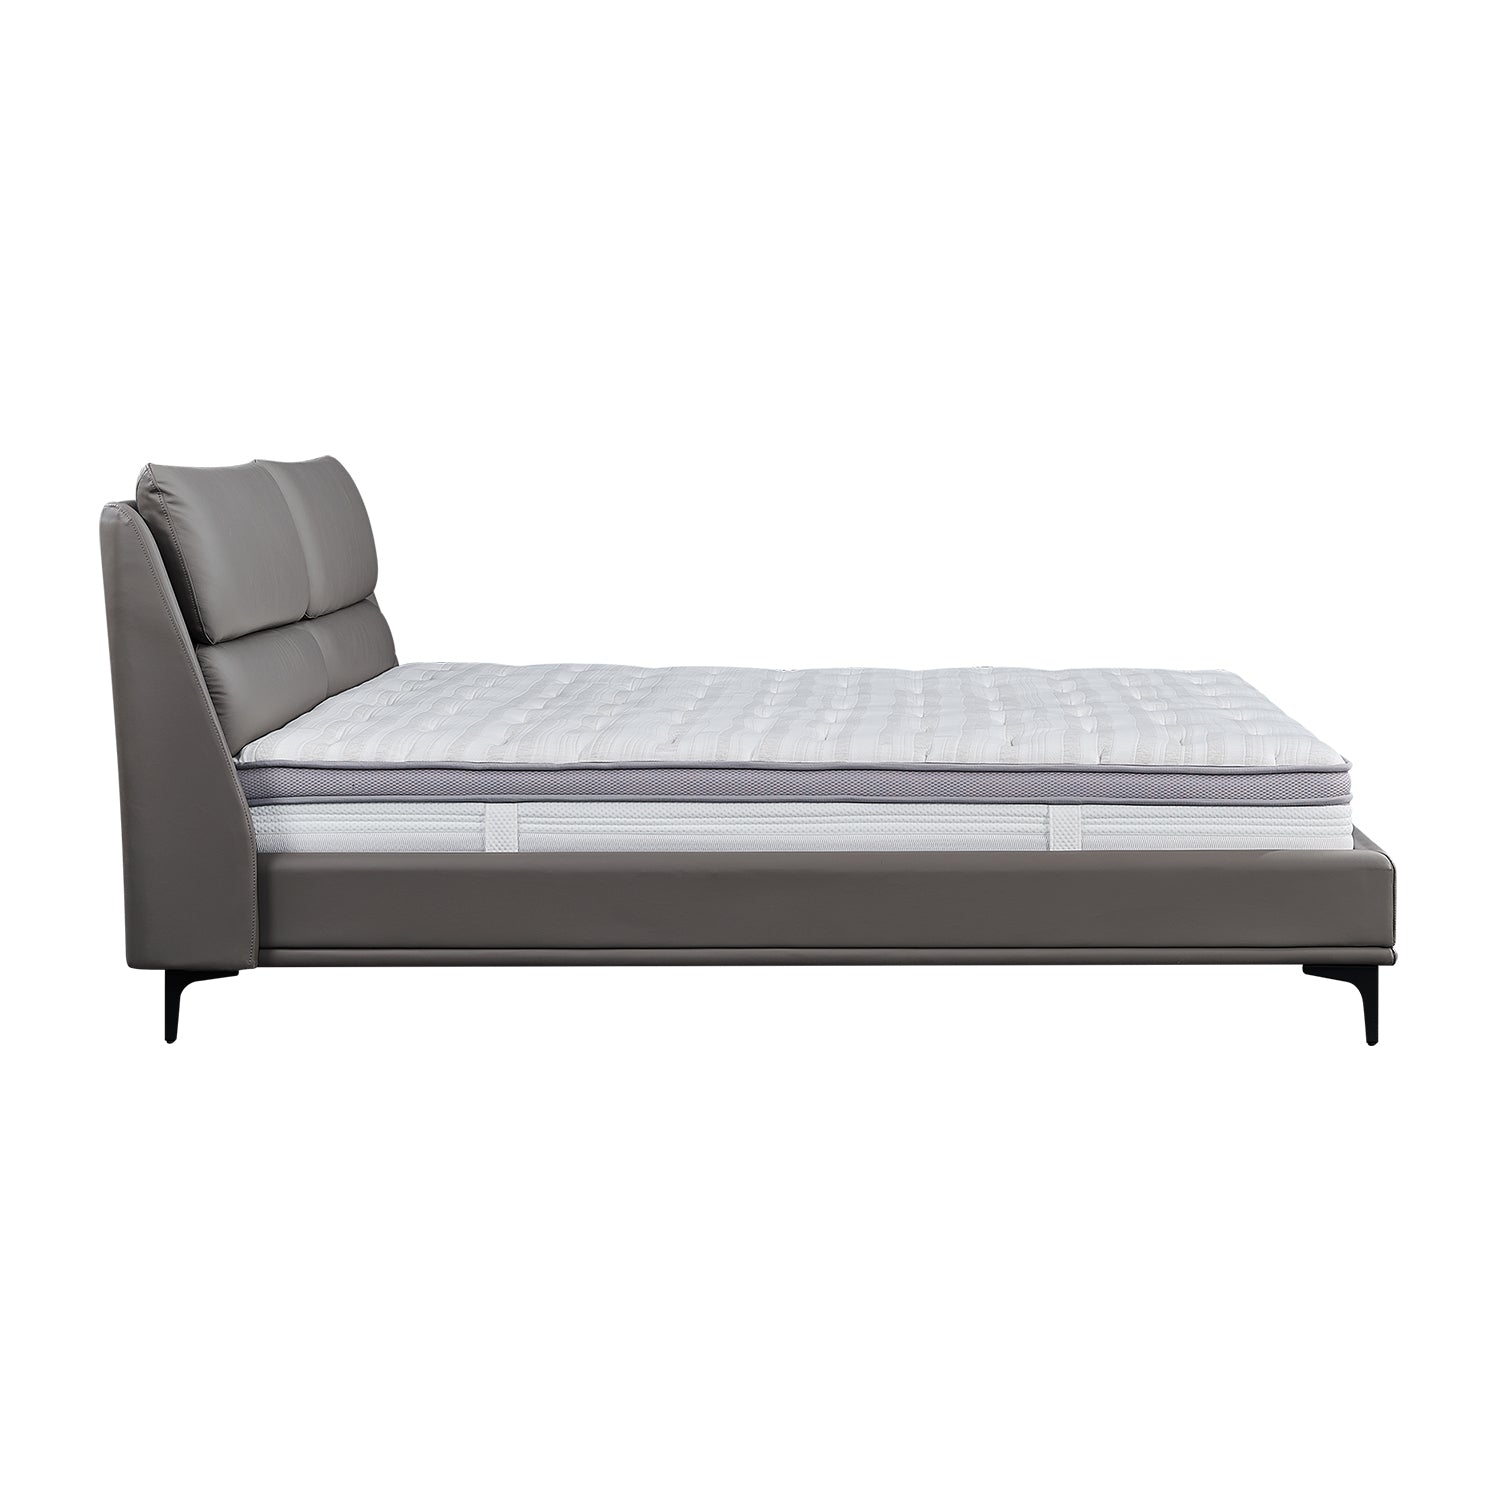 DeRUCCI Bed Frame BOC1 - 019, side profile view with gray leather frame, padded headboard, and mattress.